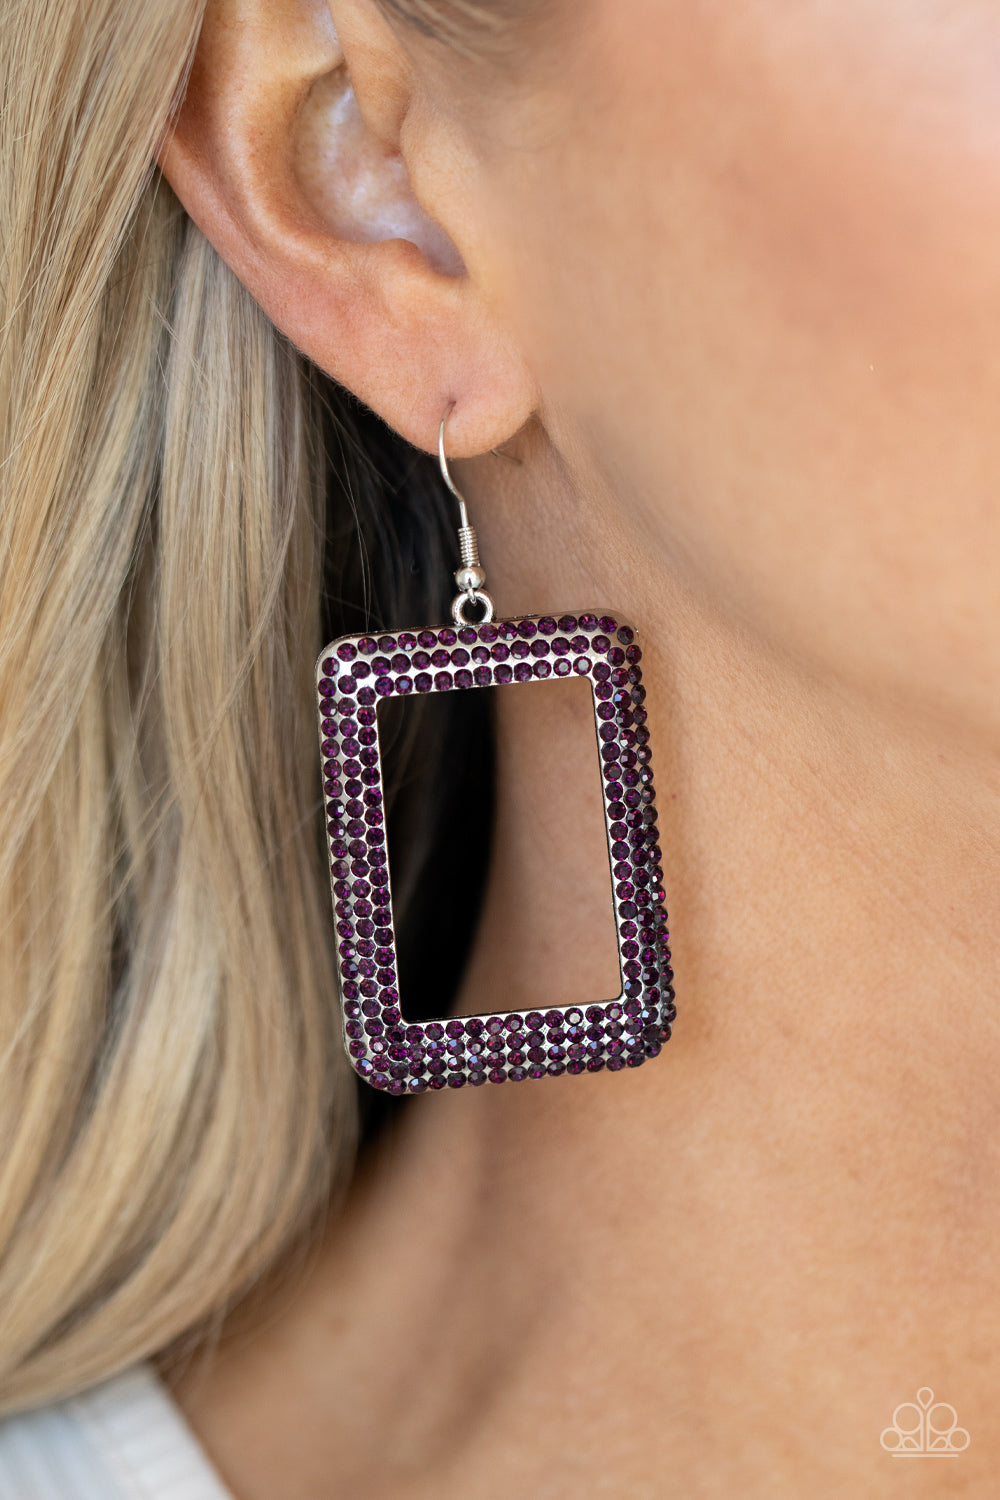 Paparazzi Accessories World FRAME-ous - Purple Fishhook Earrings bordered in rows of glittery purple rhinestones, an oversized silver rectangular frame swings from the ear for a fashionable finish. Earring attaches to a standard fishhook fitting. 